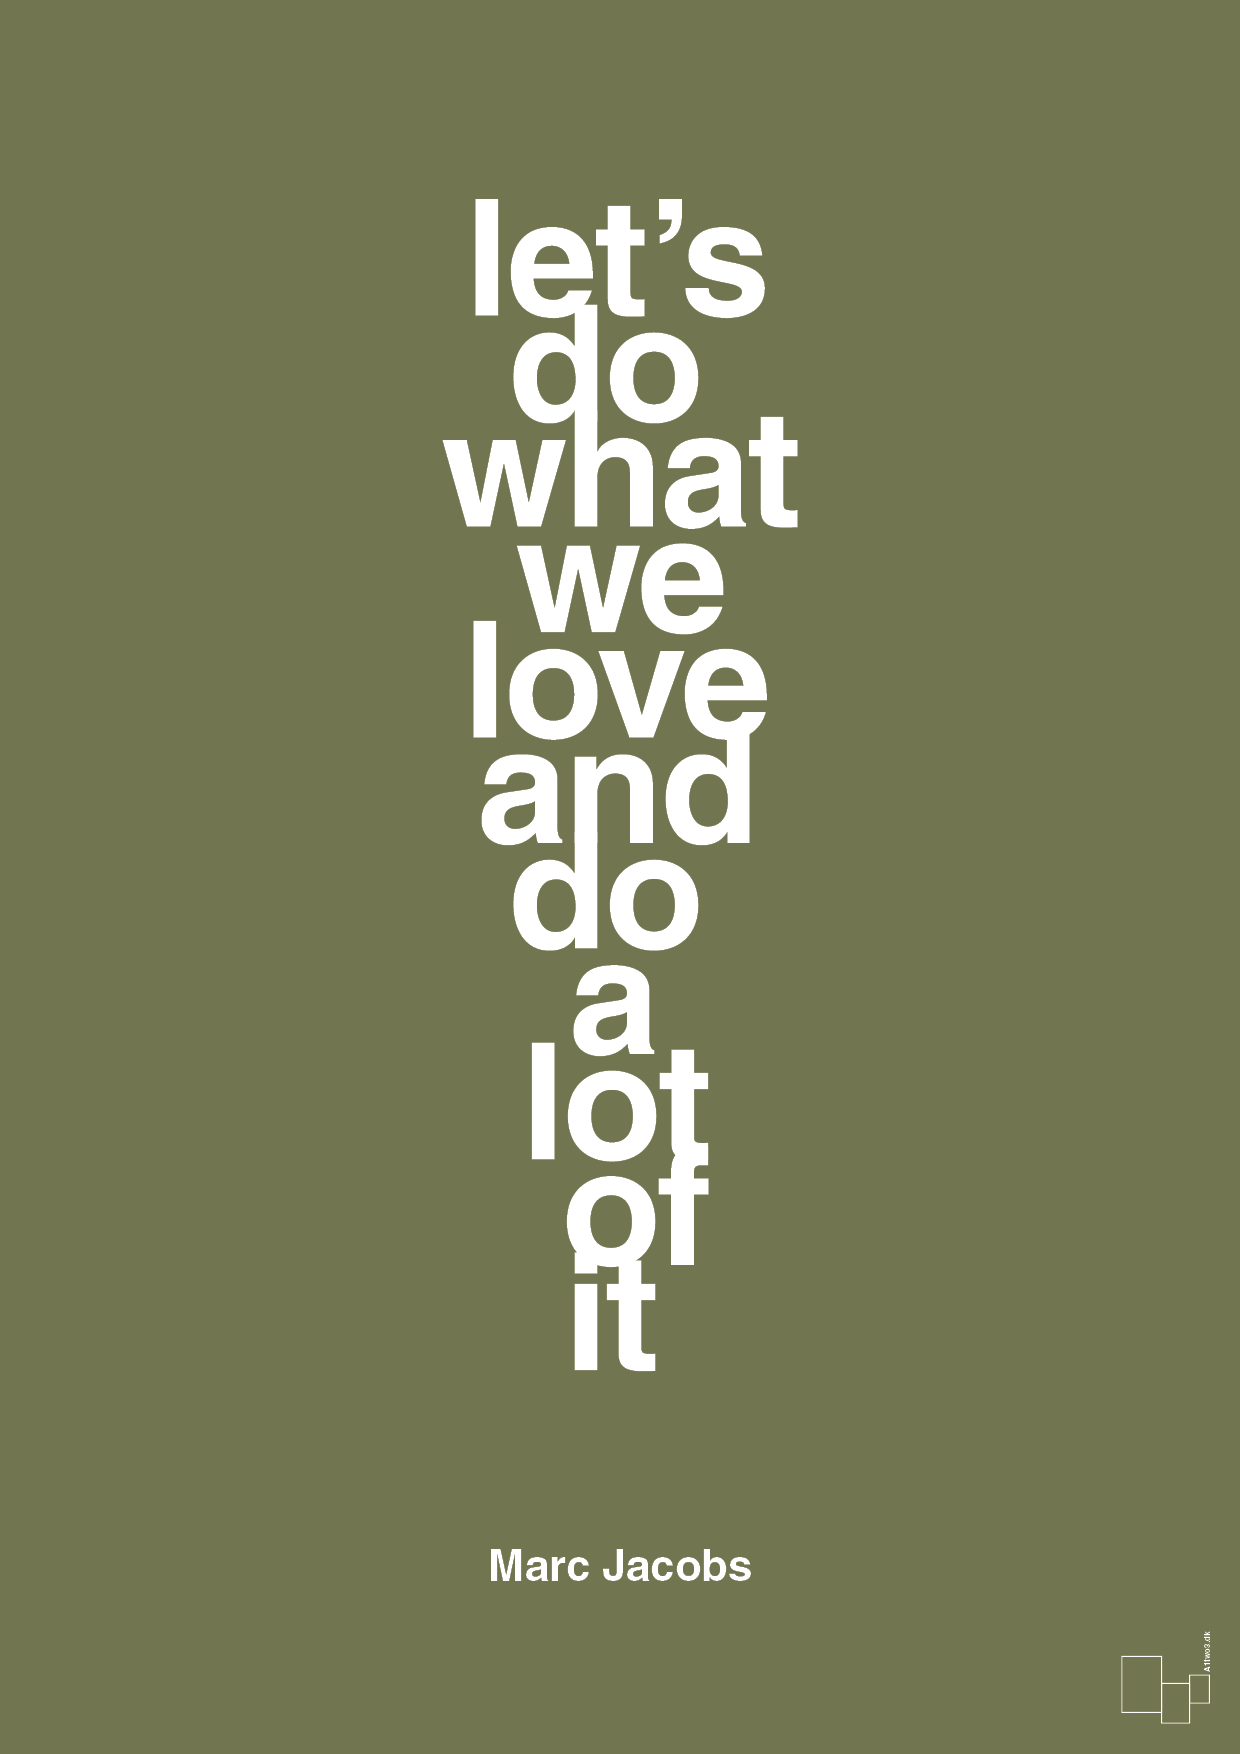 lets do what we love and do a lot of it - Plakat med Citater i Secret Meadow